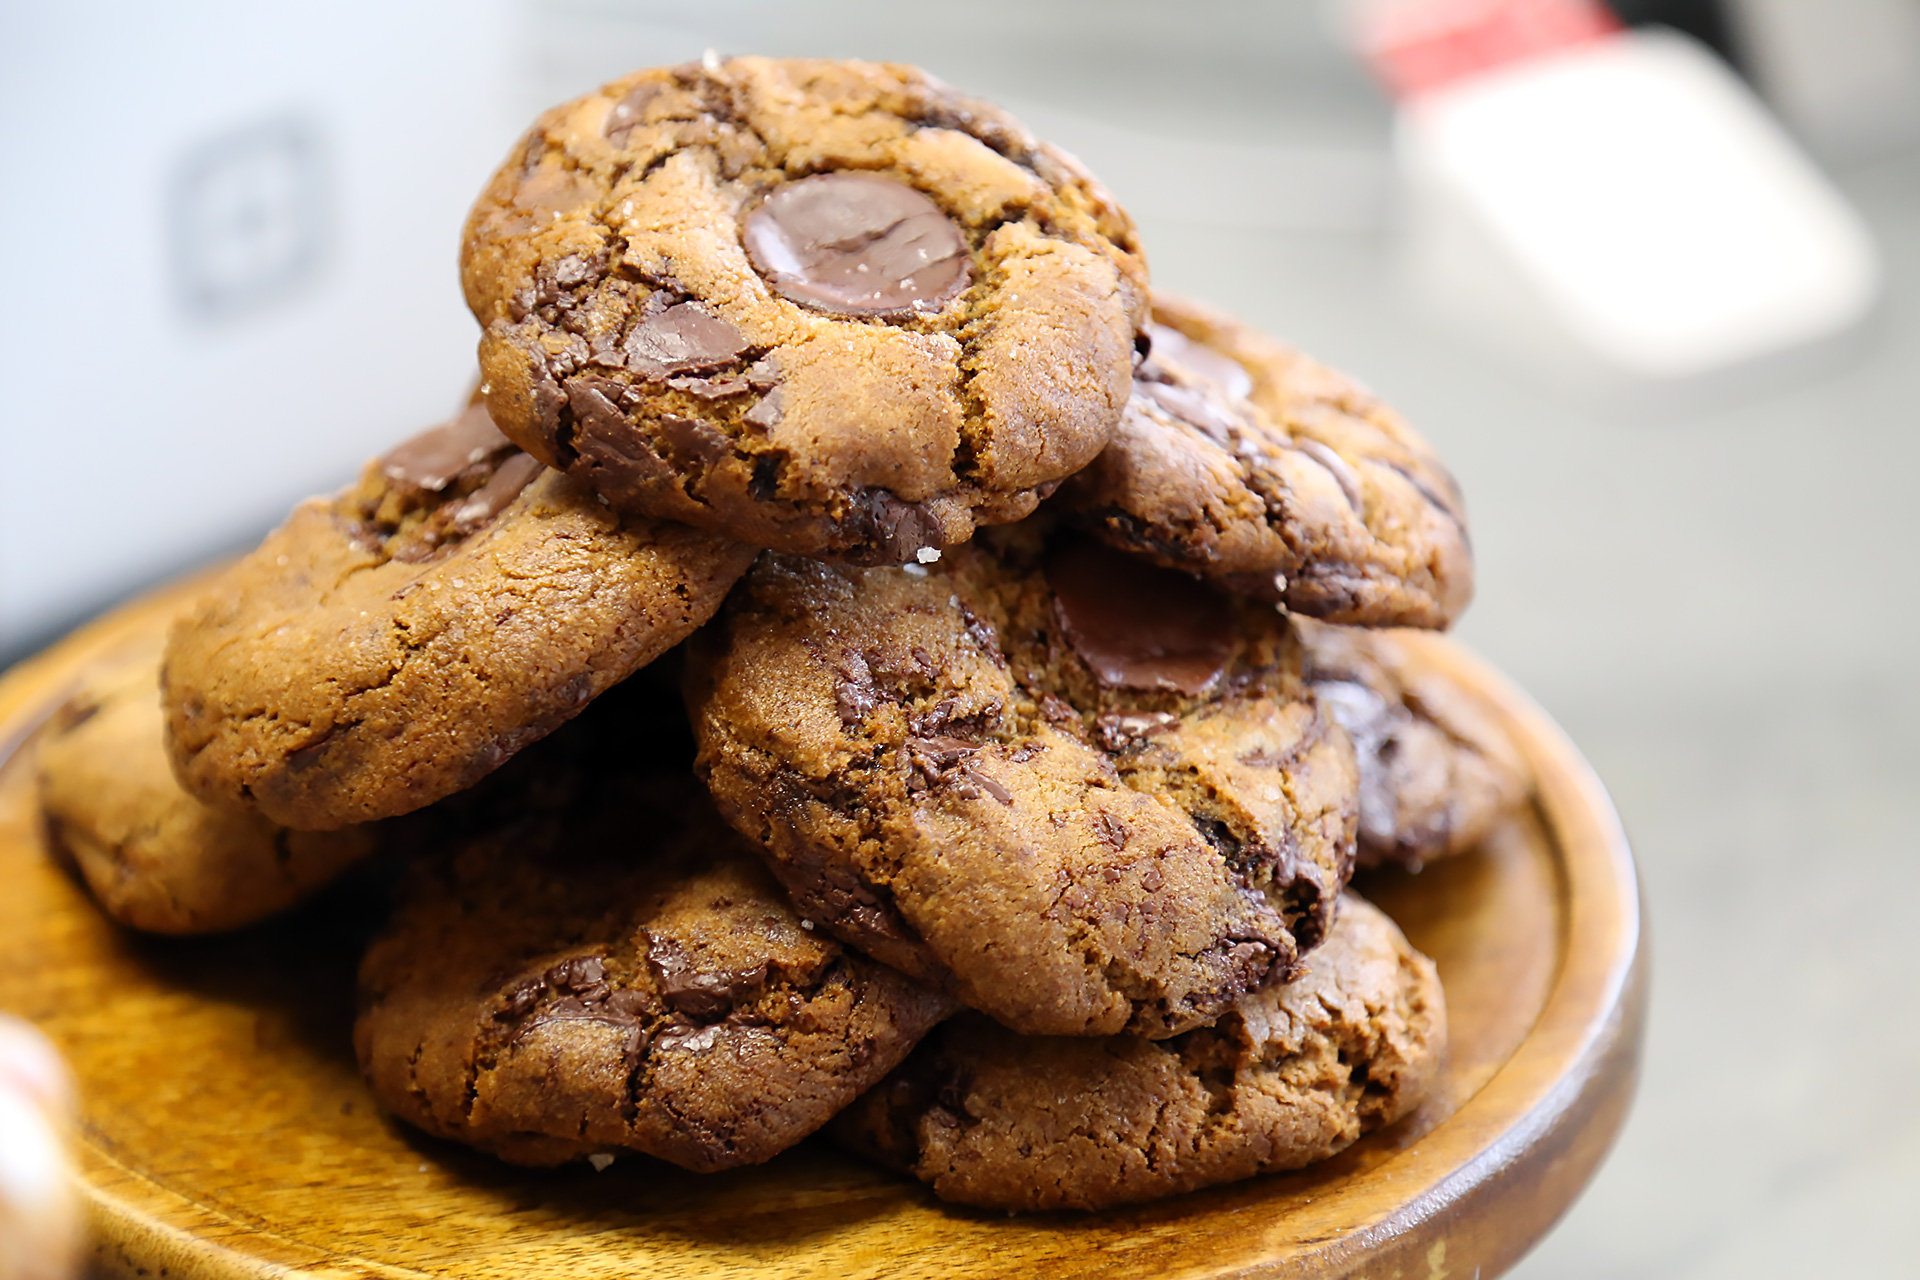 Showstopper chocolate chip cookies.